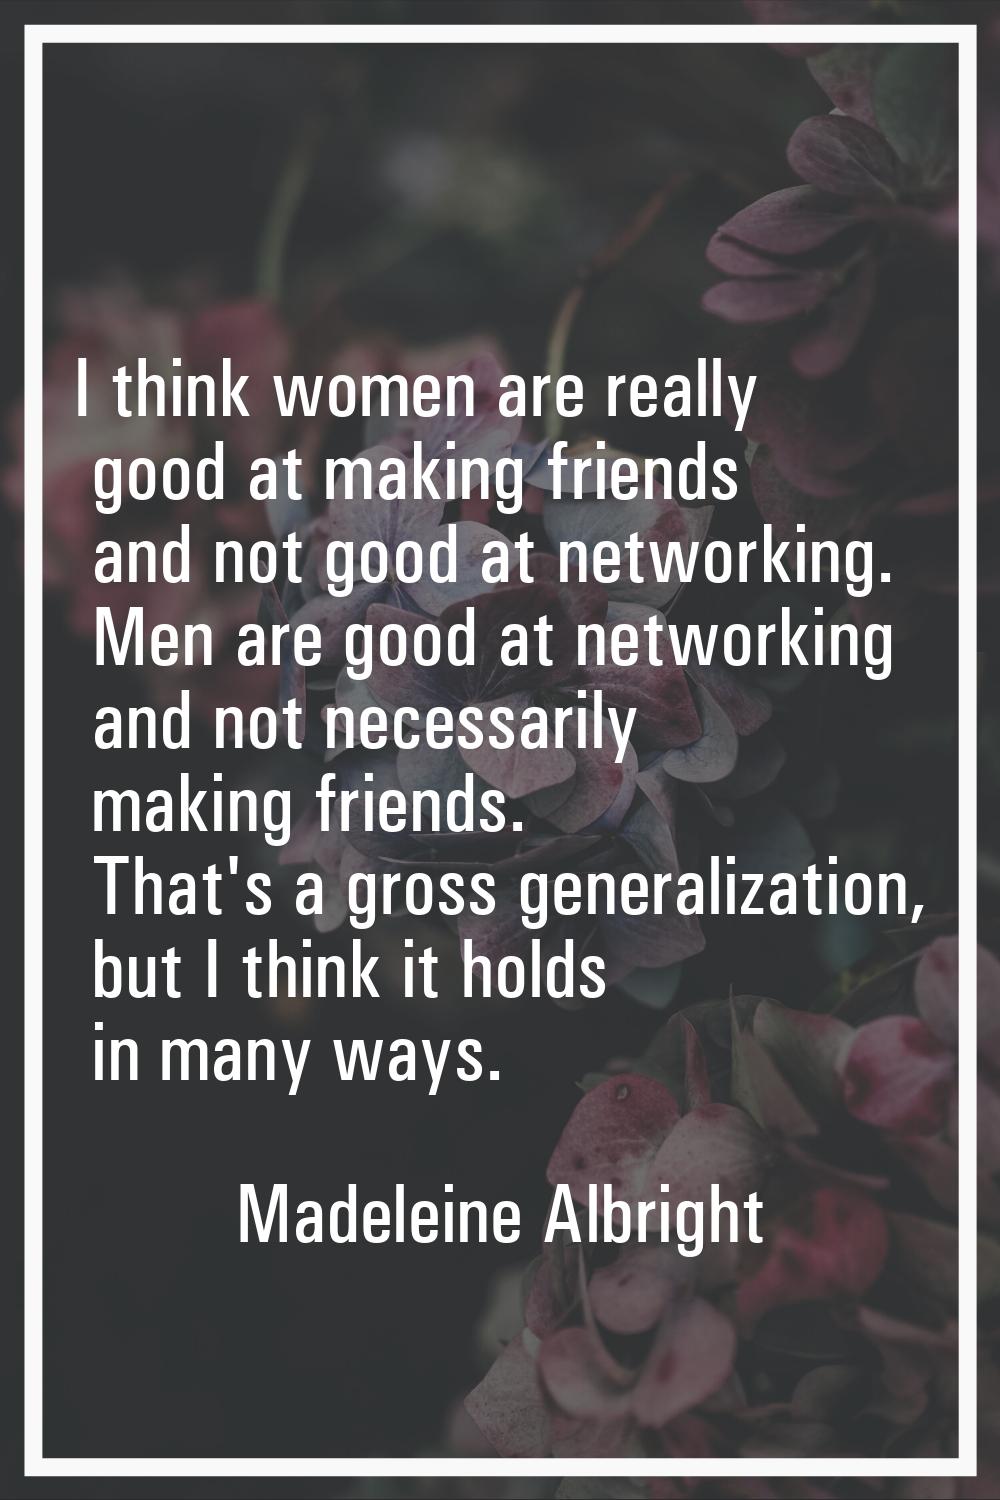 I think women are really good at making friends and not good at networking. Men are good at network